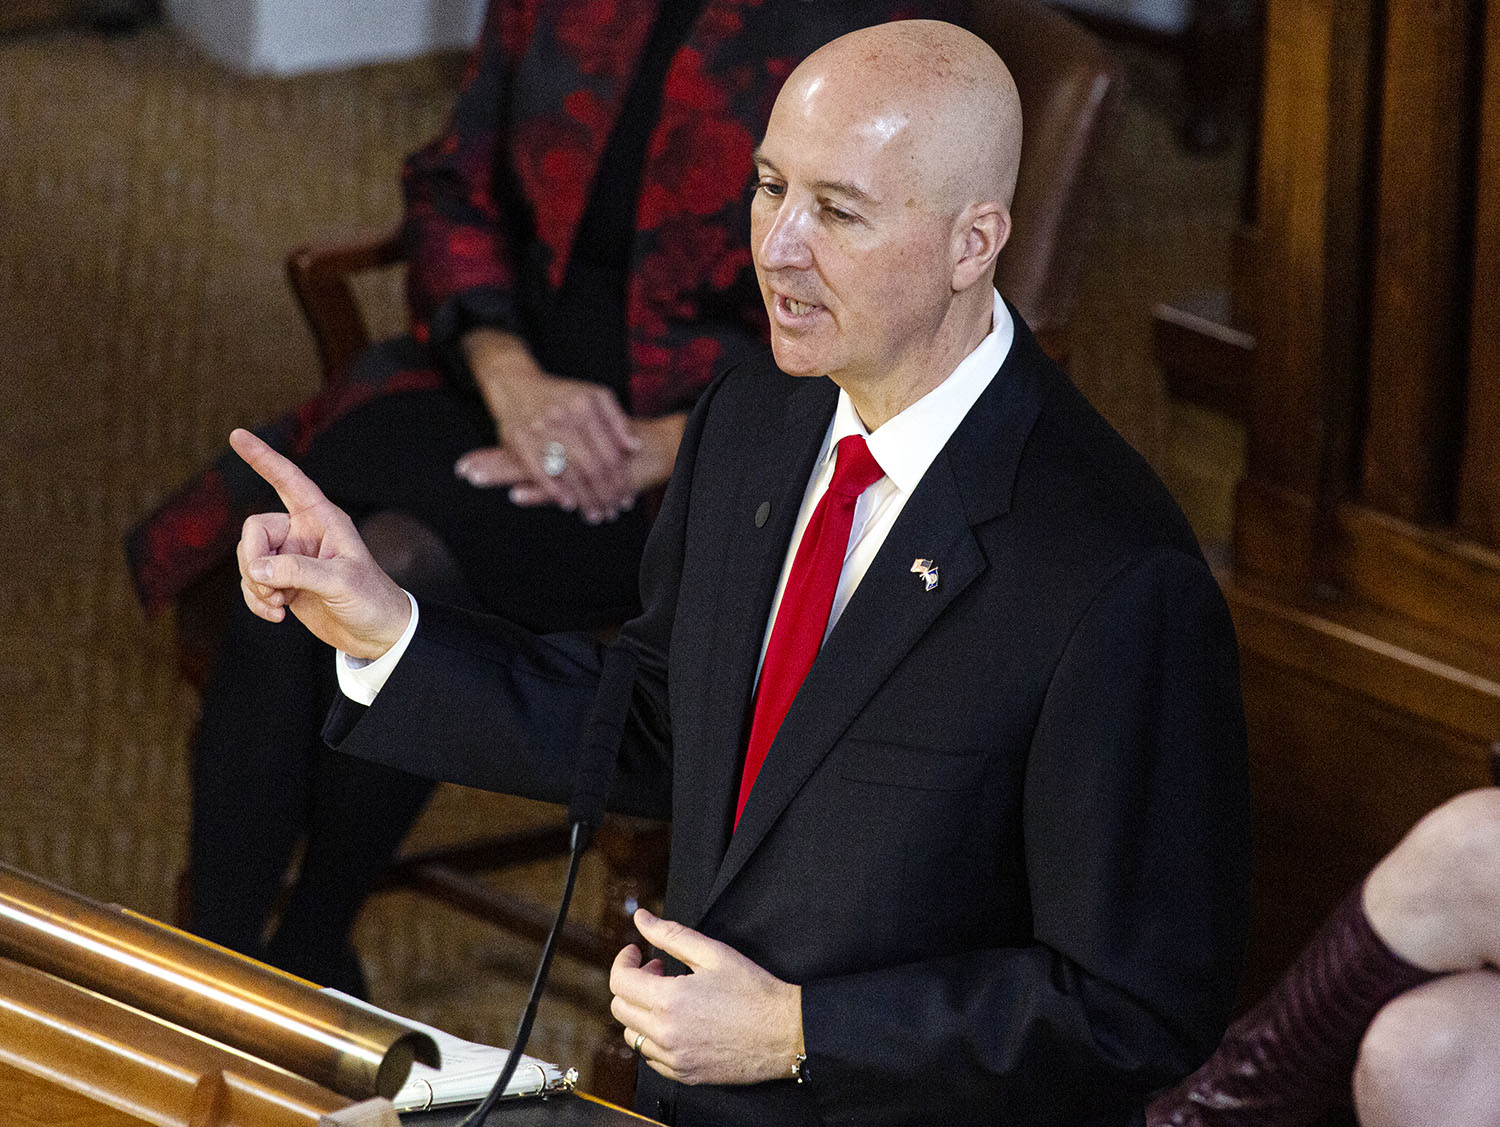 Nebraska Gov. Pete Ricketts delivers the annual State of the State address Thursday at the Capitol in Lincoln. (Courtesy photo/Jake Daniels)